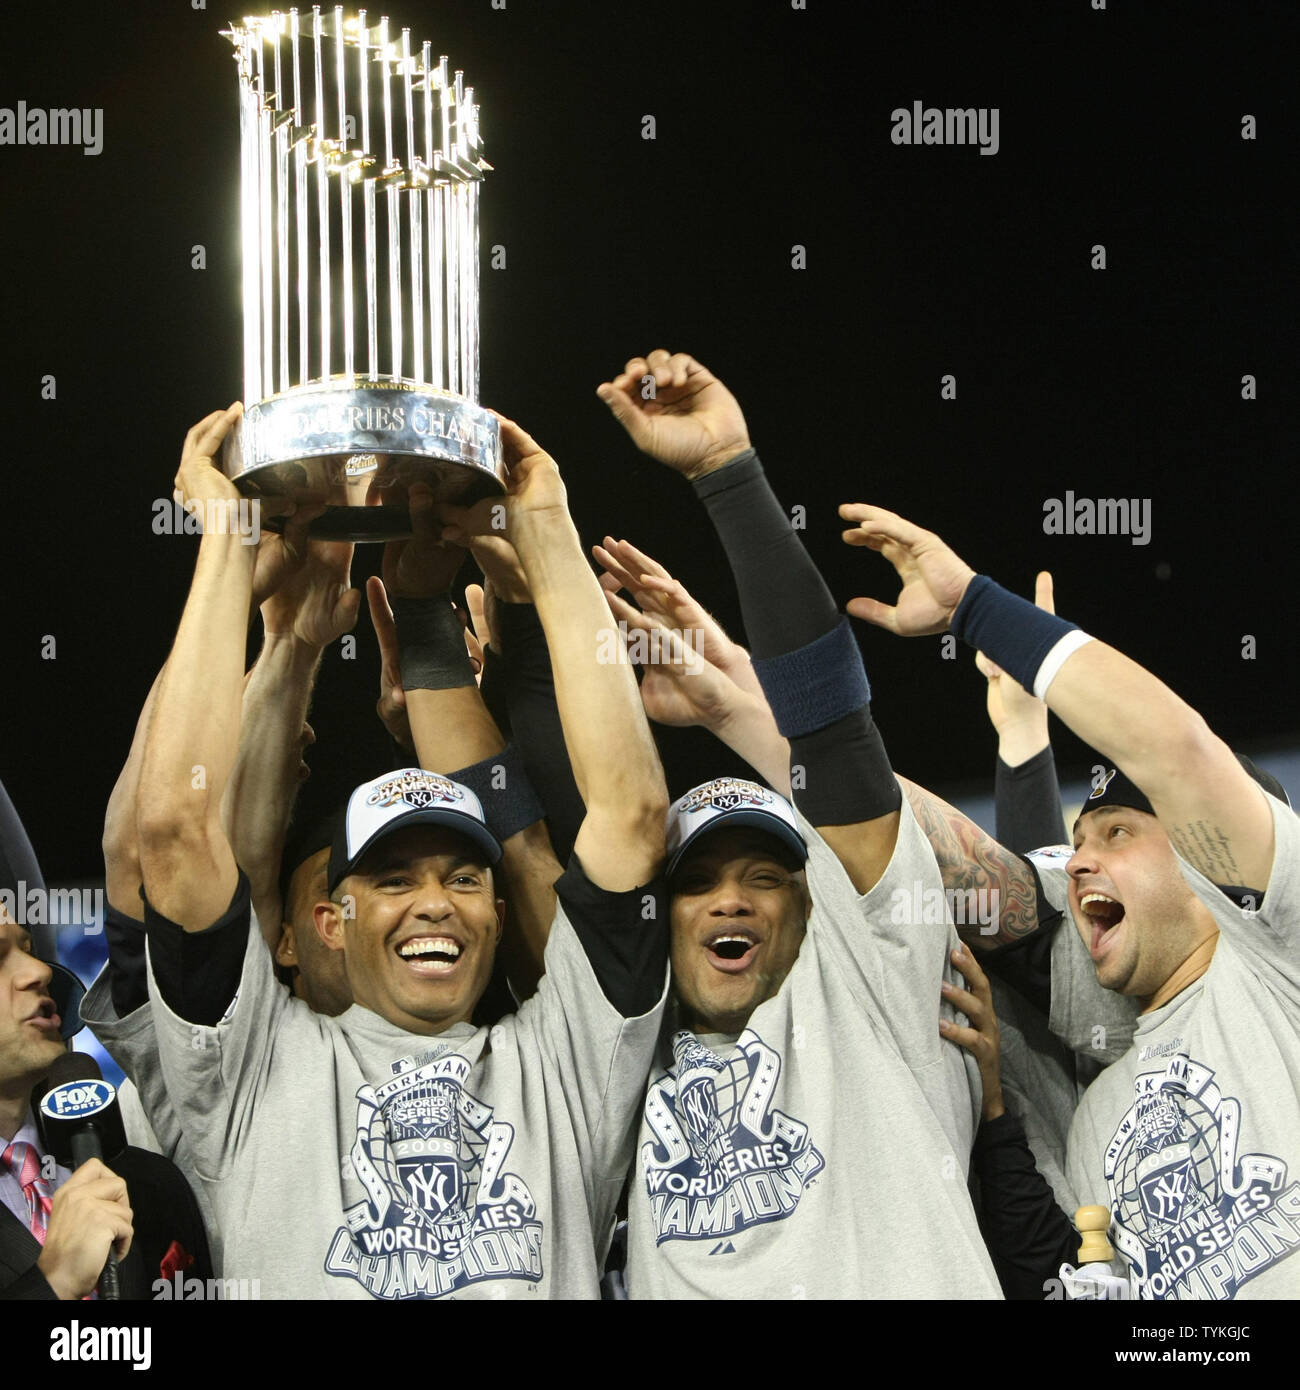 Mariano Rivera (L), hoists the championship trophy as Melky